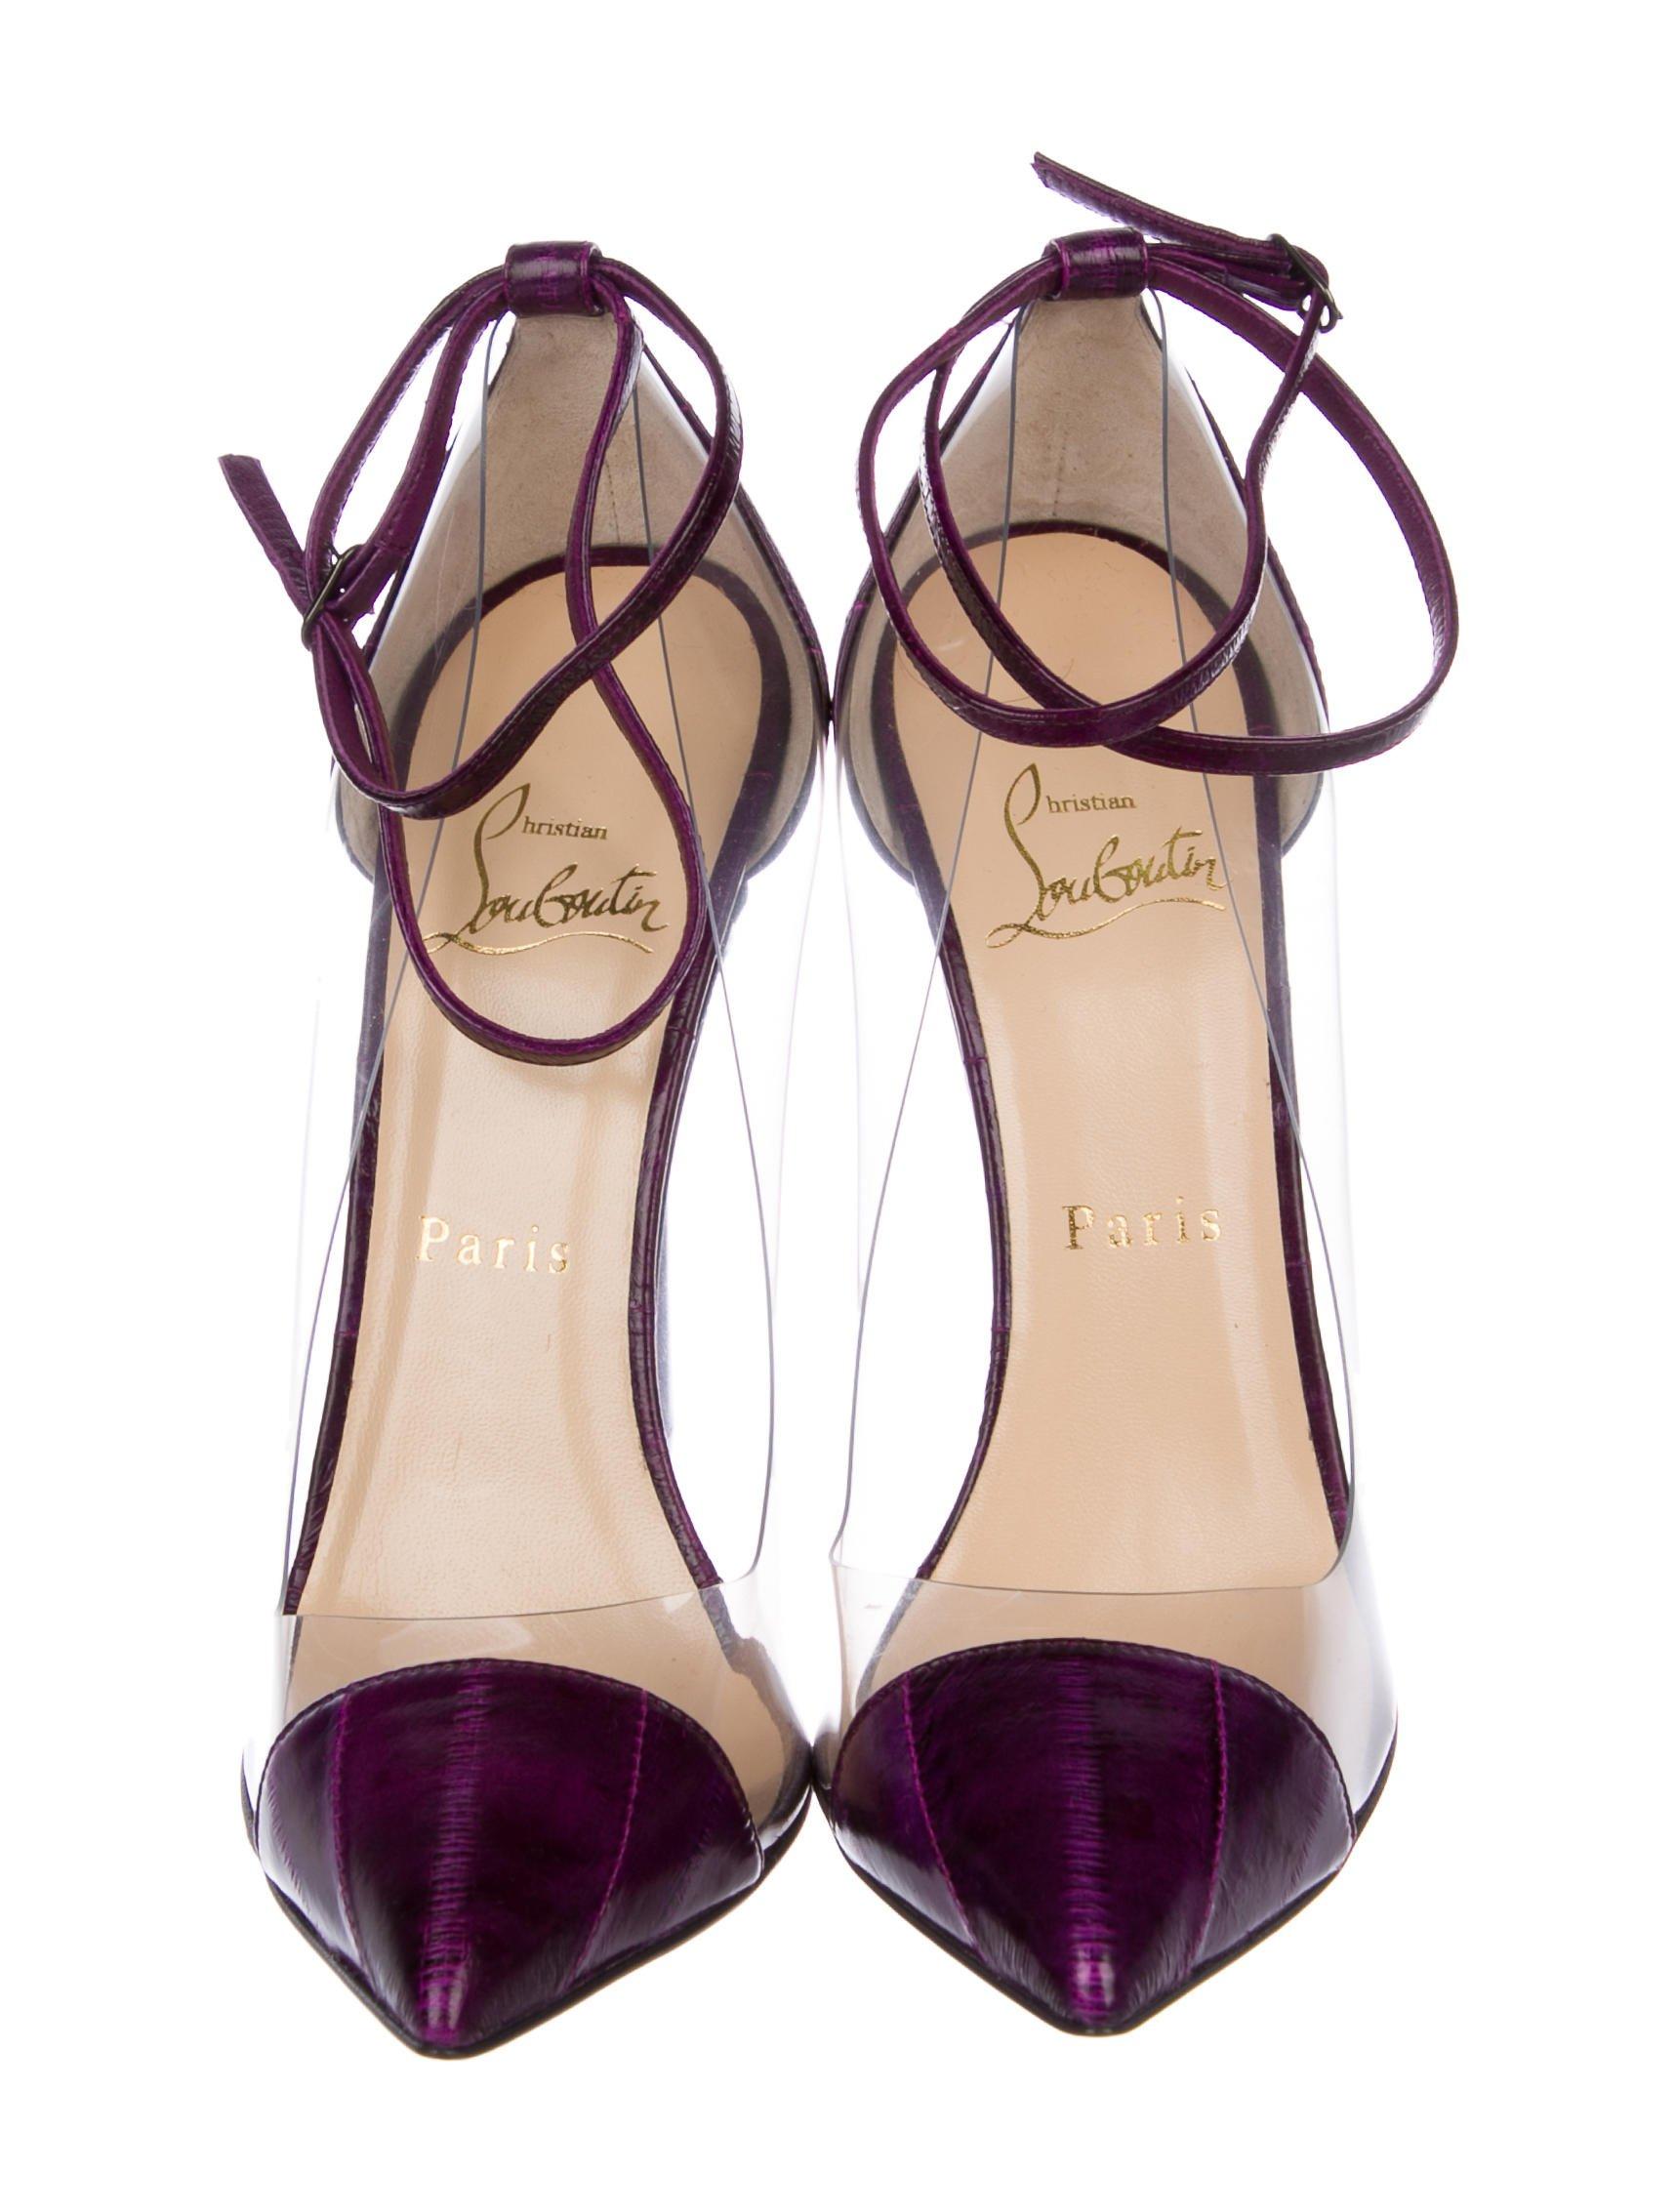 Christian Louboutin NEW Clear PVC Purple Leather Evening Pumps Heels in Box

Size IT 36.5
PVC
Eel
Ankle buckle closure
Made in Italy
Heel height 4.25